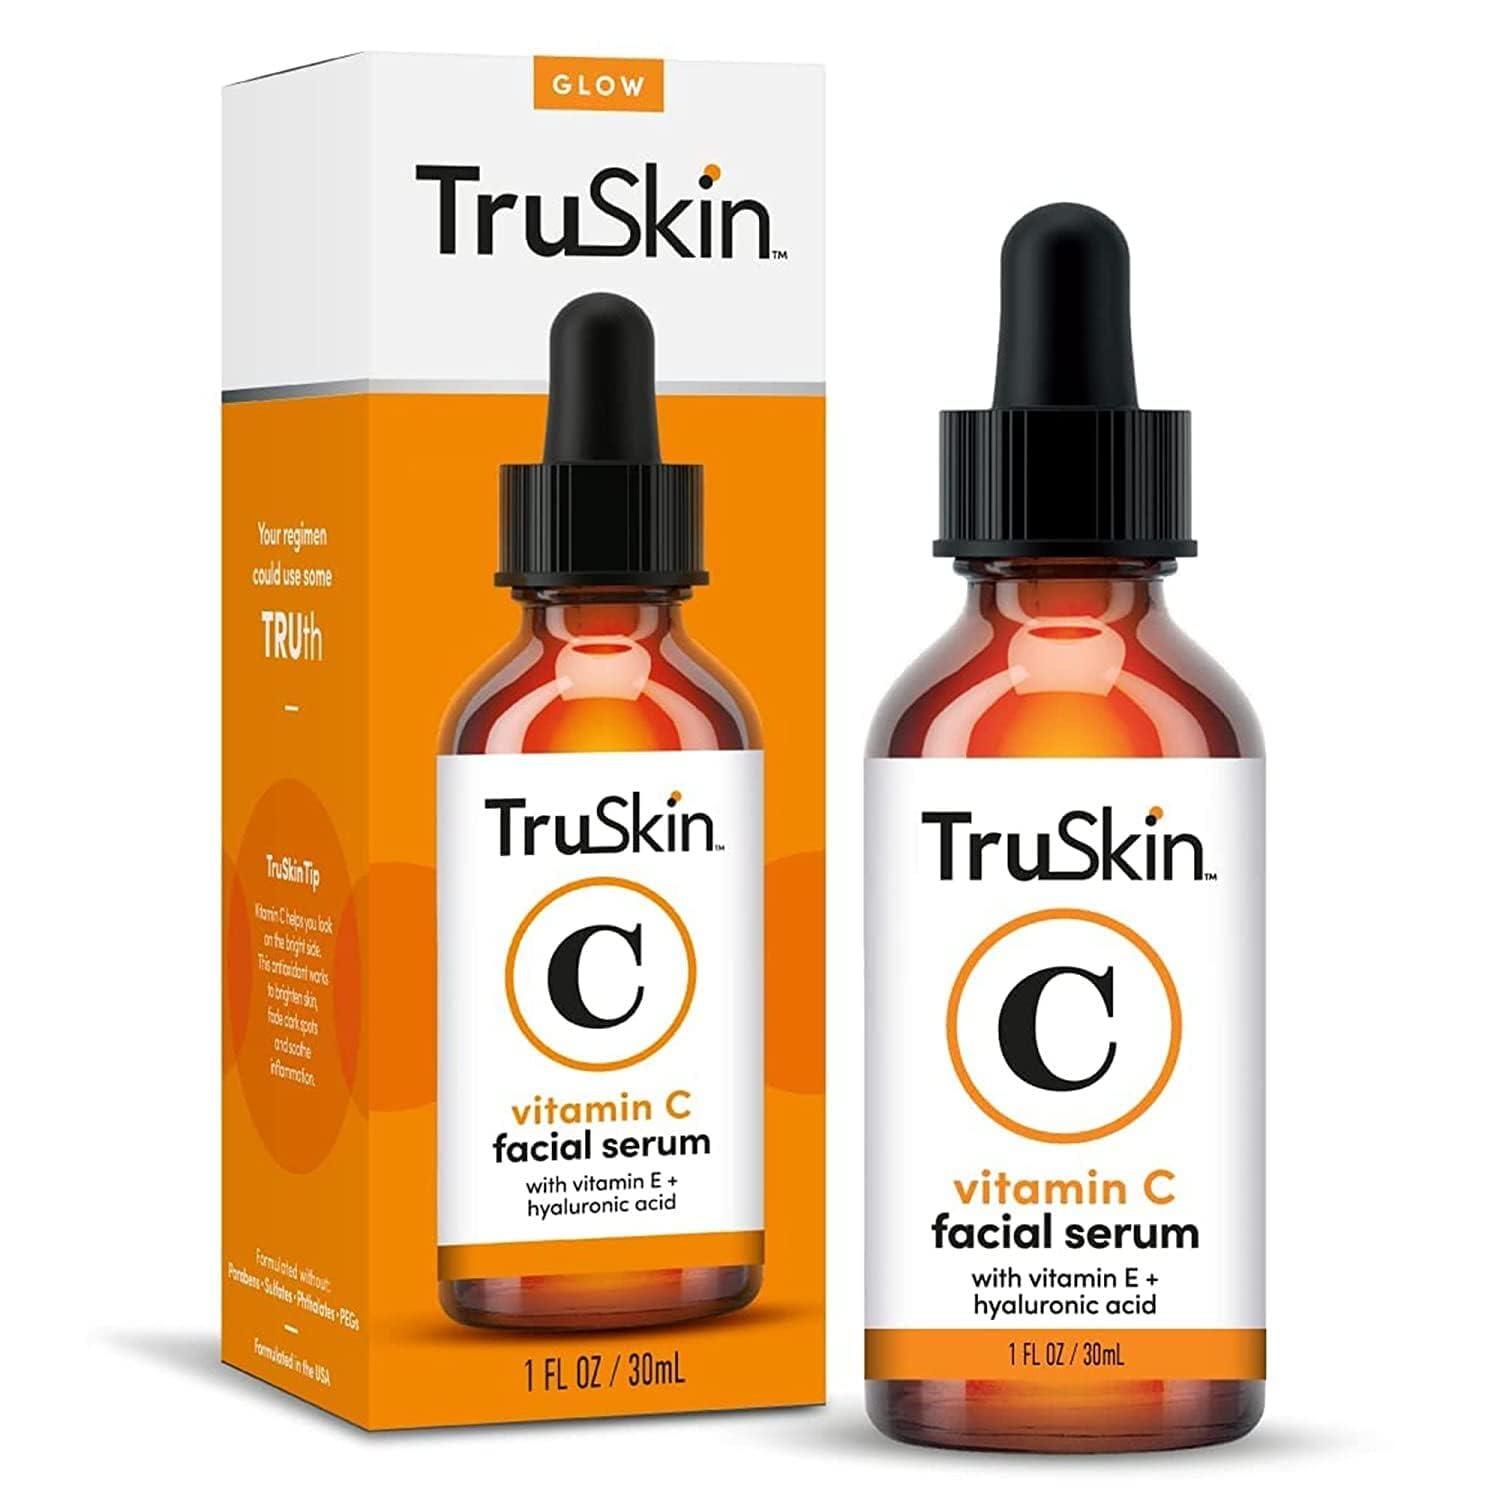 TruSkin Vitamin C Serum & Liquid Exfoliant Duo – Vitamin C Face Serum 1oz & AHA, BHA, PHA Liquid Exfoliant 4.2oz for Brighter, Smoother Skin – Even Skin Tone & Texture, Improve Fine Lines & Wrinkles